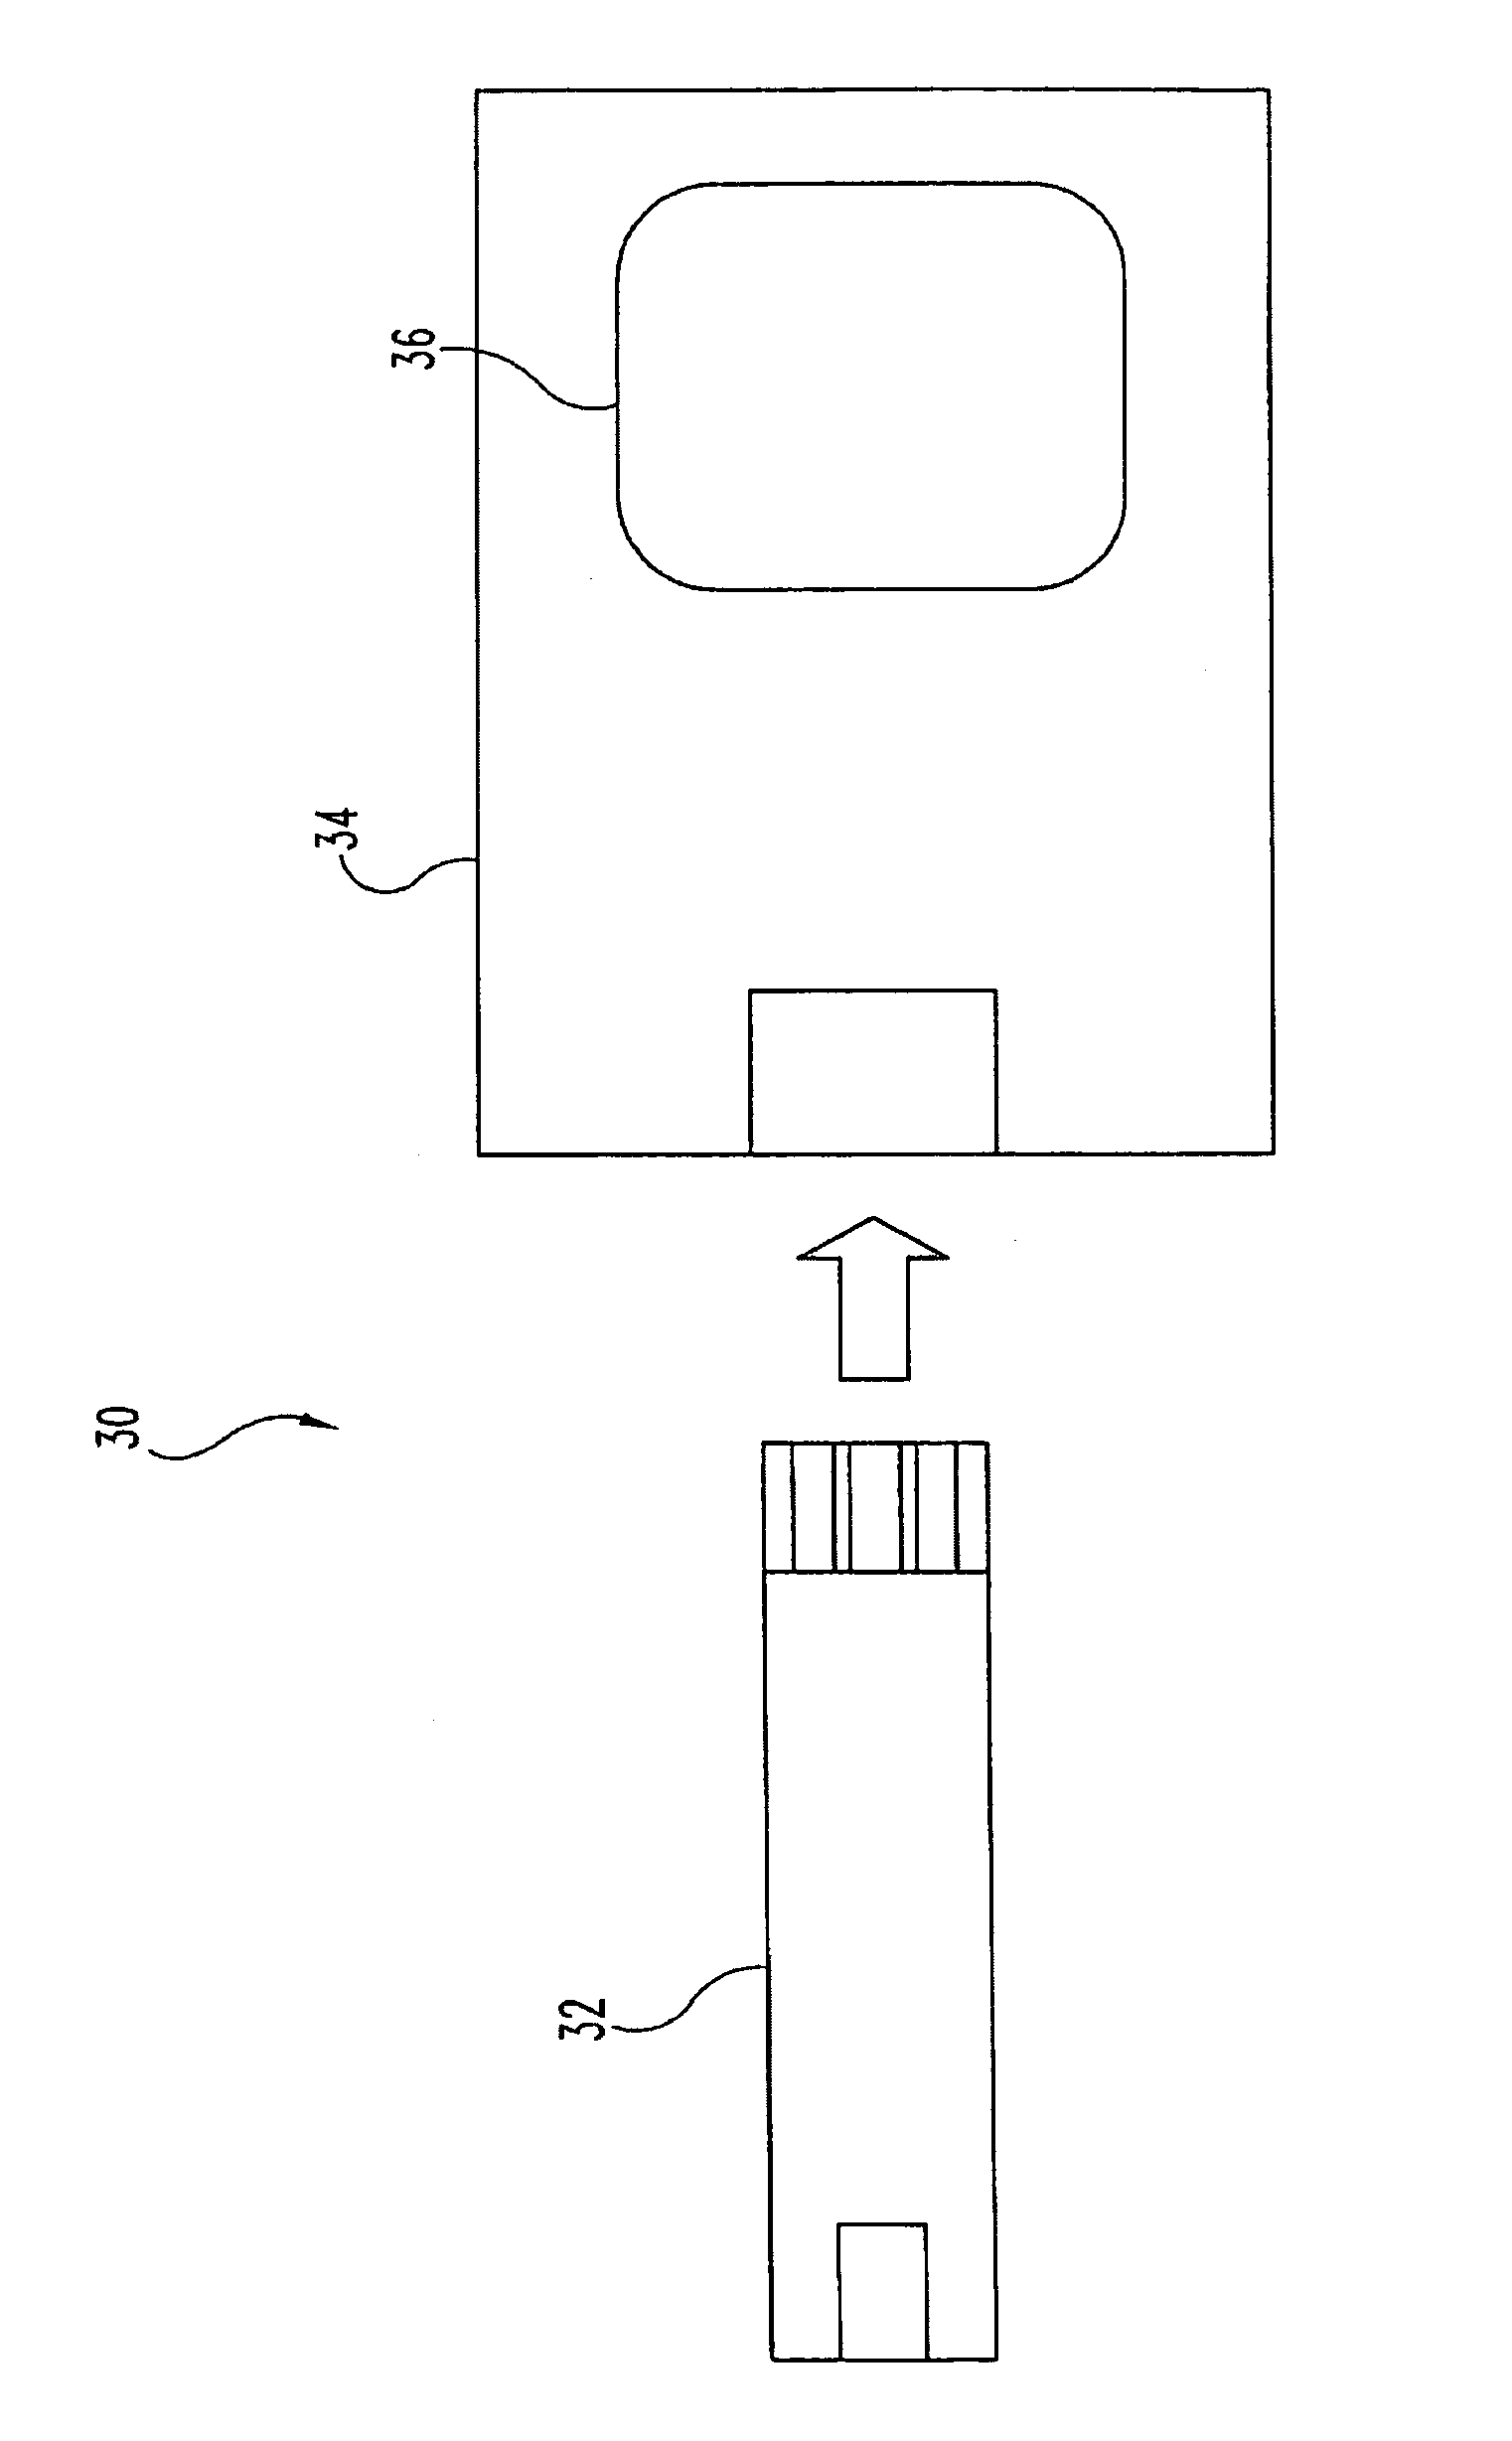 Method for measuring analyte concentration in a liquid sample